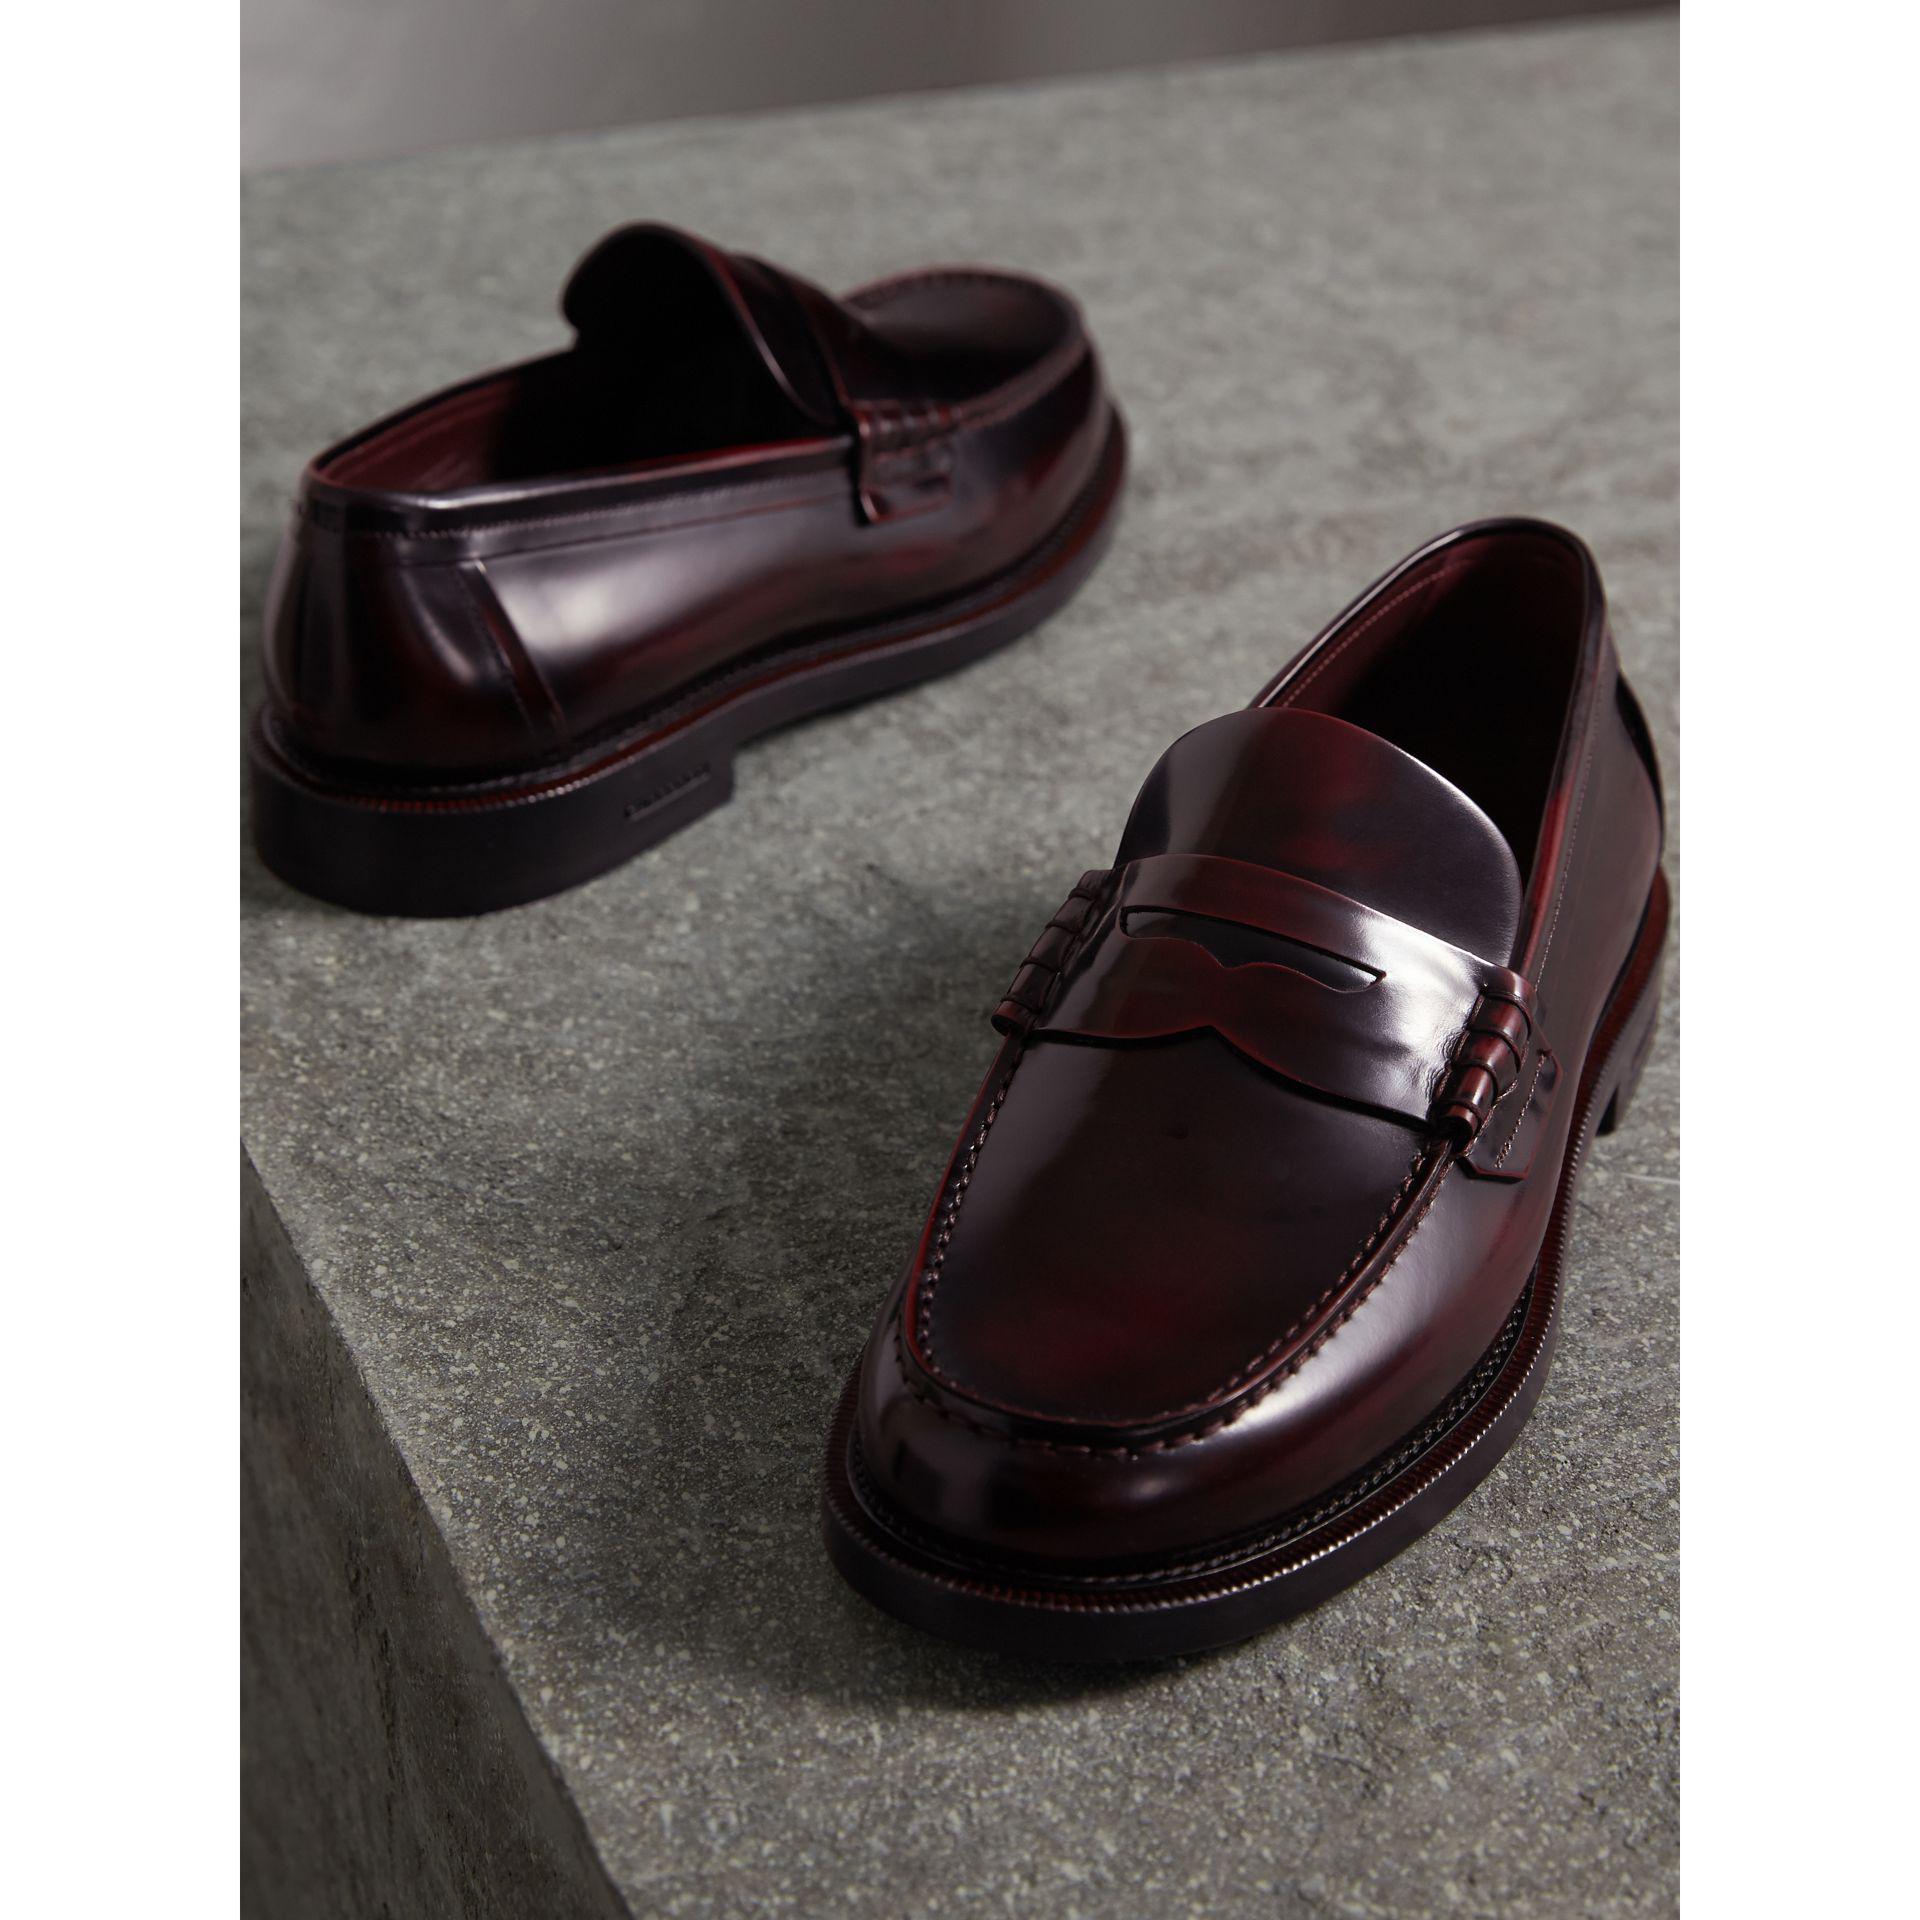 Burberry Leather Penny Loafers for Men 